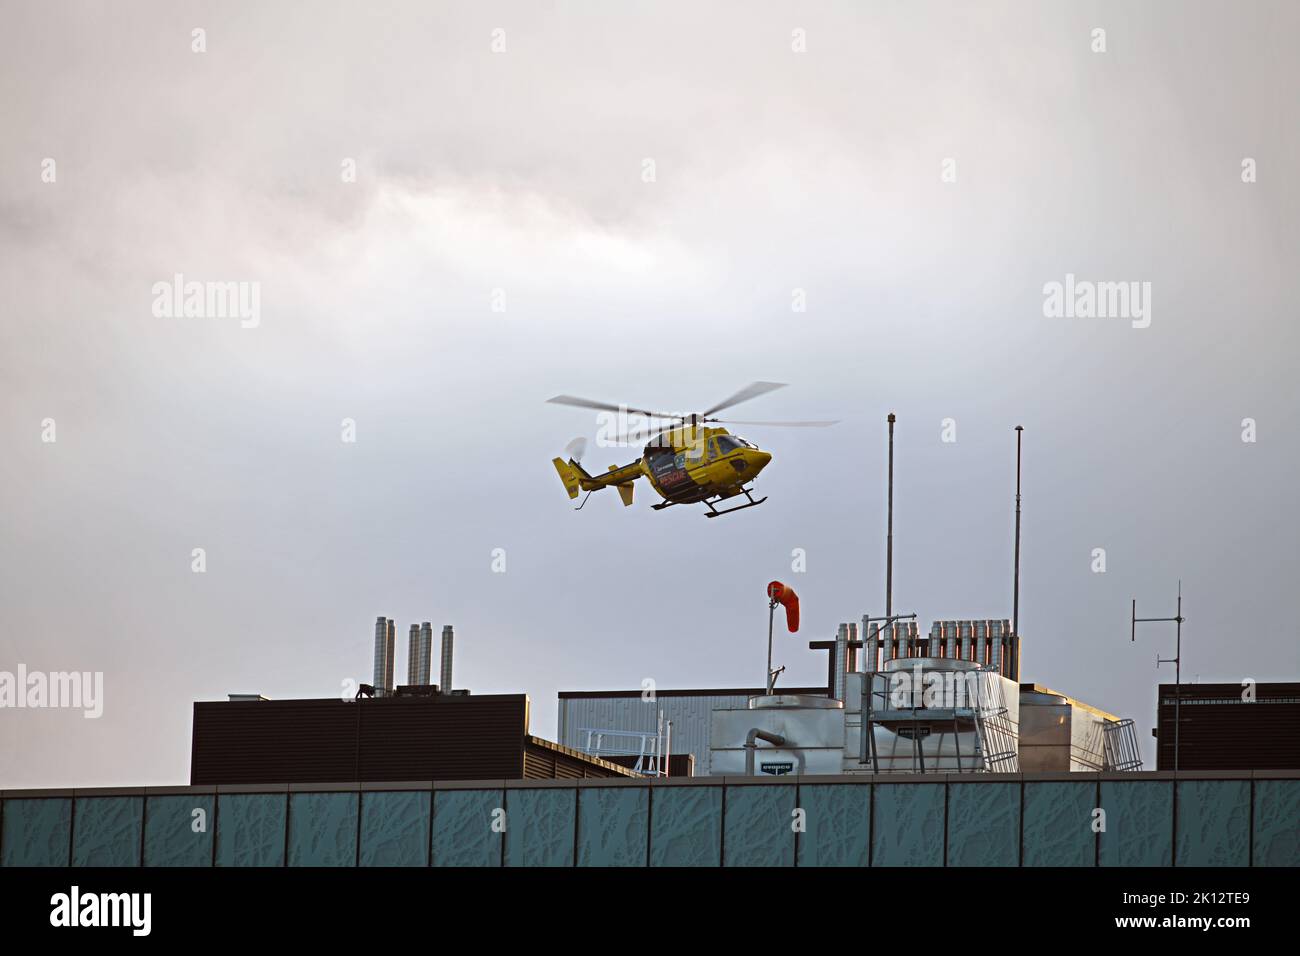 CHRISTCHURCH, NEW ZEALAND, SEPTEMBER 8, 2022: An emergency helicopter lands on top of the General Hospital in Christchurch. Grainy image shot in poor evening light. Stock Photo